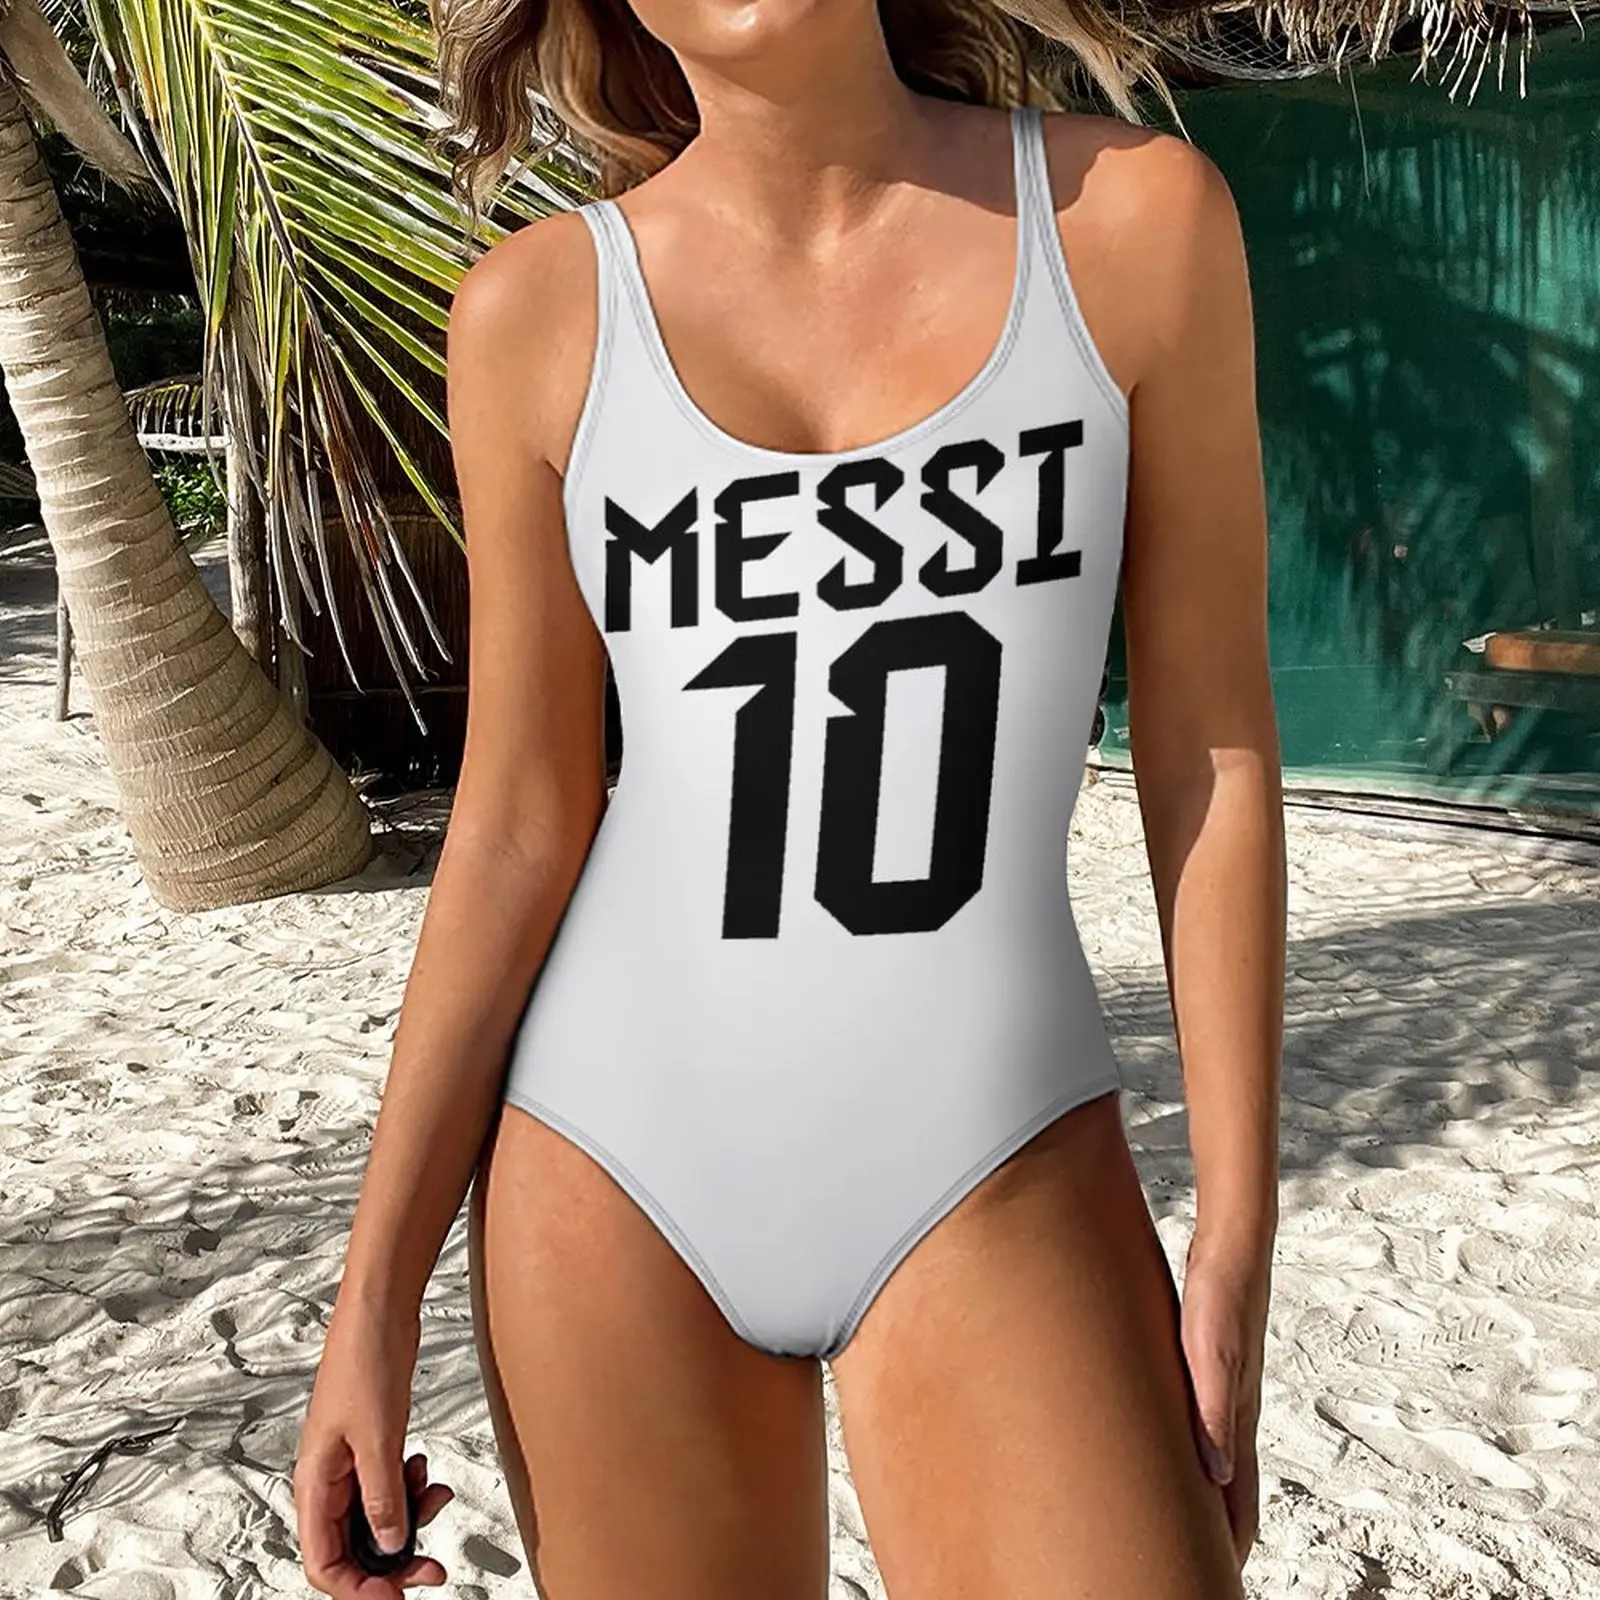 

Exotic Women's Bikinis Argentina Lioneler And Messi (12) One-piece Swimsuit Graphic Vintage Party Vintage Swimwear Geeky